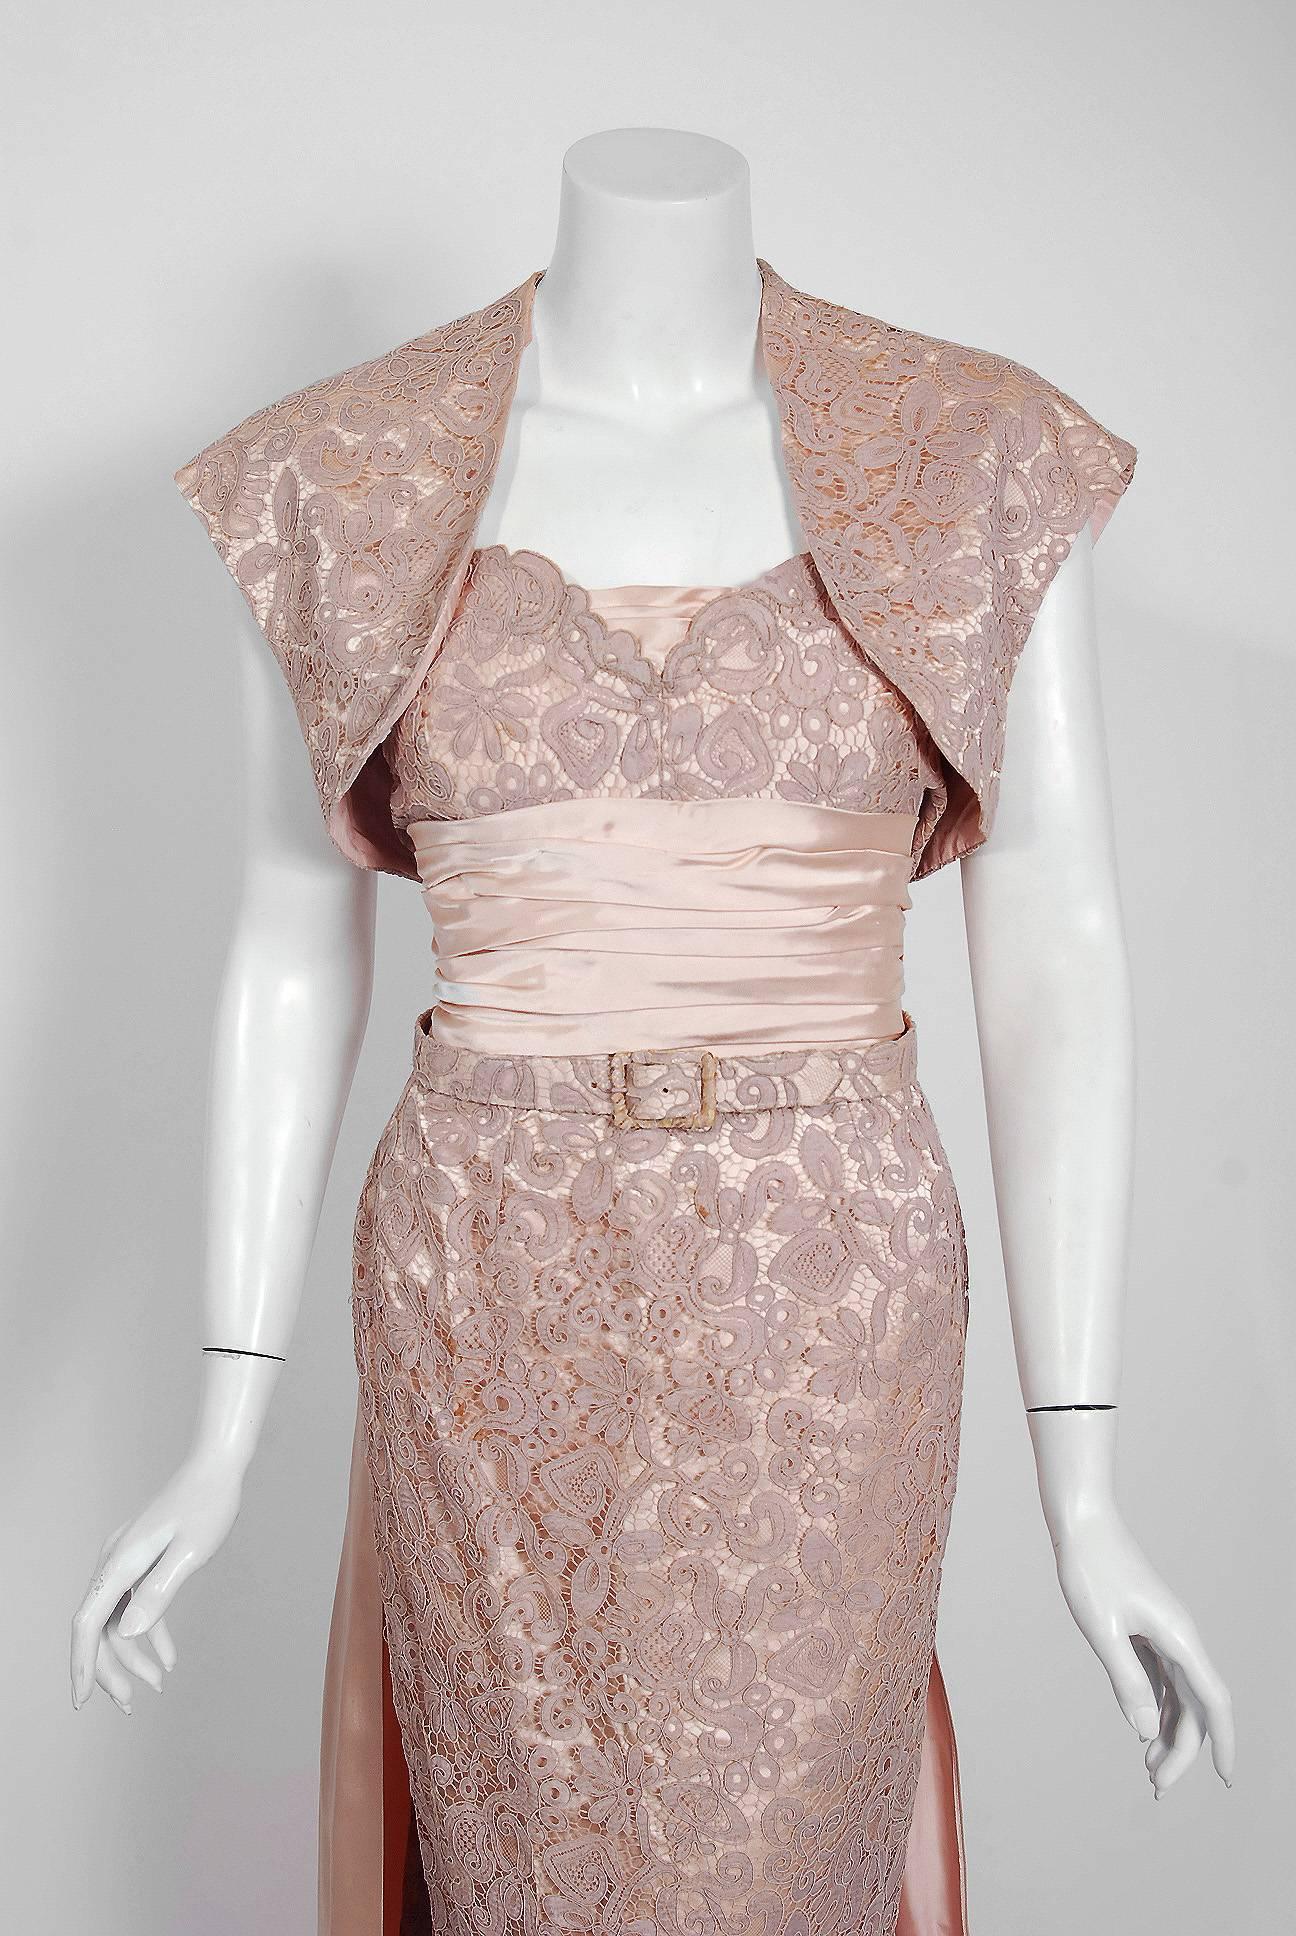 Breathtaking Pierre Balmain pale champagne pink silk and lace demi-couture gown ensemble dating back to his 1952 collection. Balmain created a very sculptural quality which was always allied with a ladylike essence. His garments have a body and a